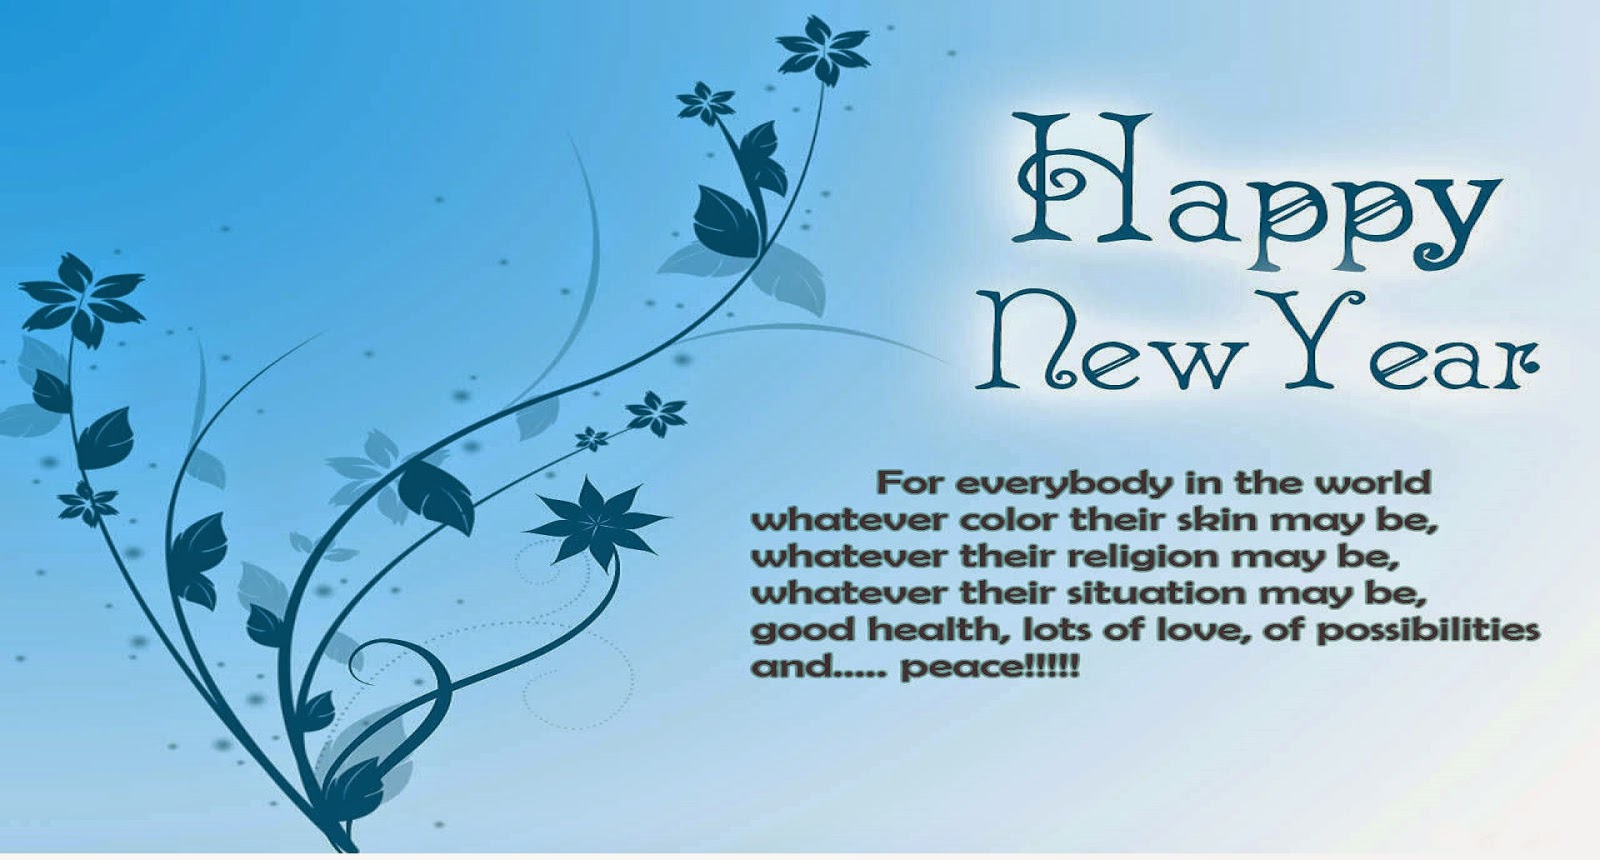 Happy New Year Wallpaper Image E Cards Greetings Wishes